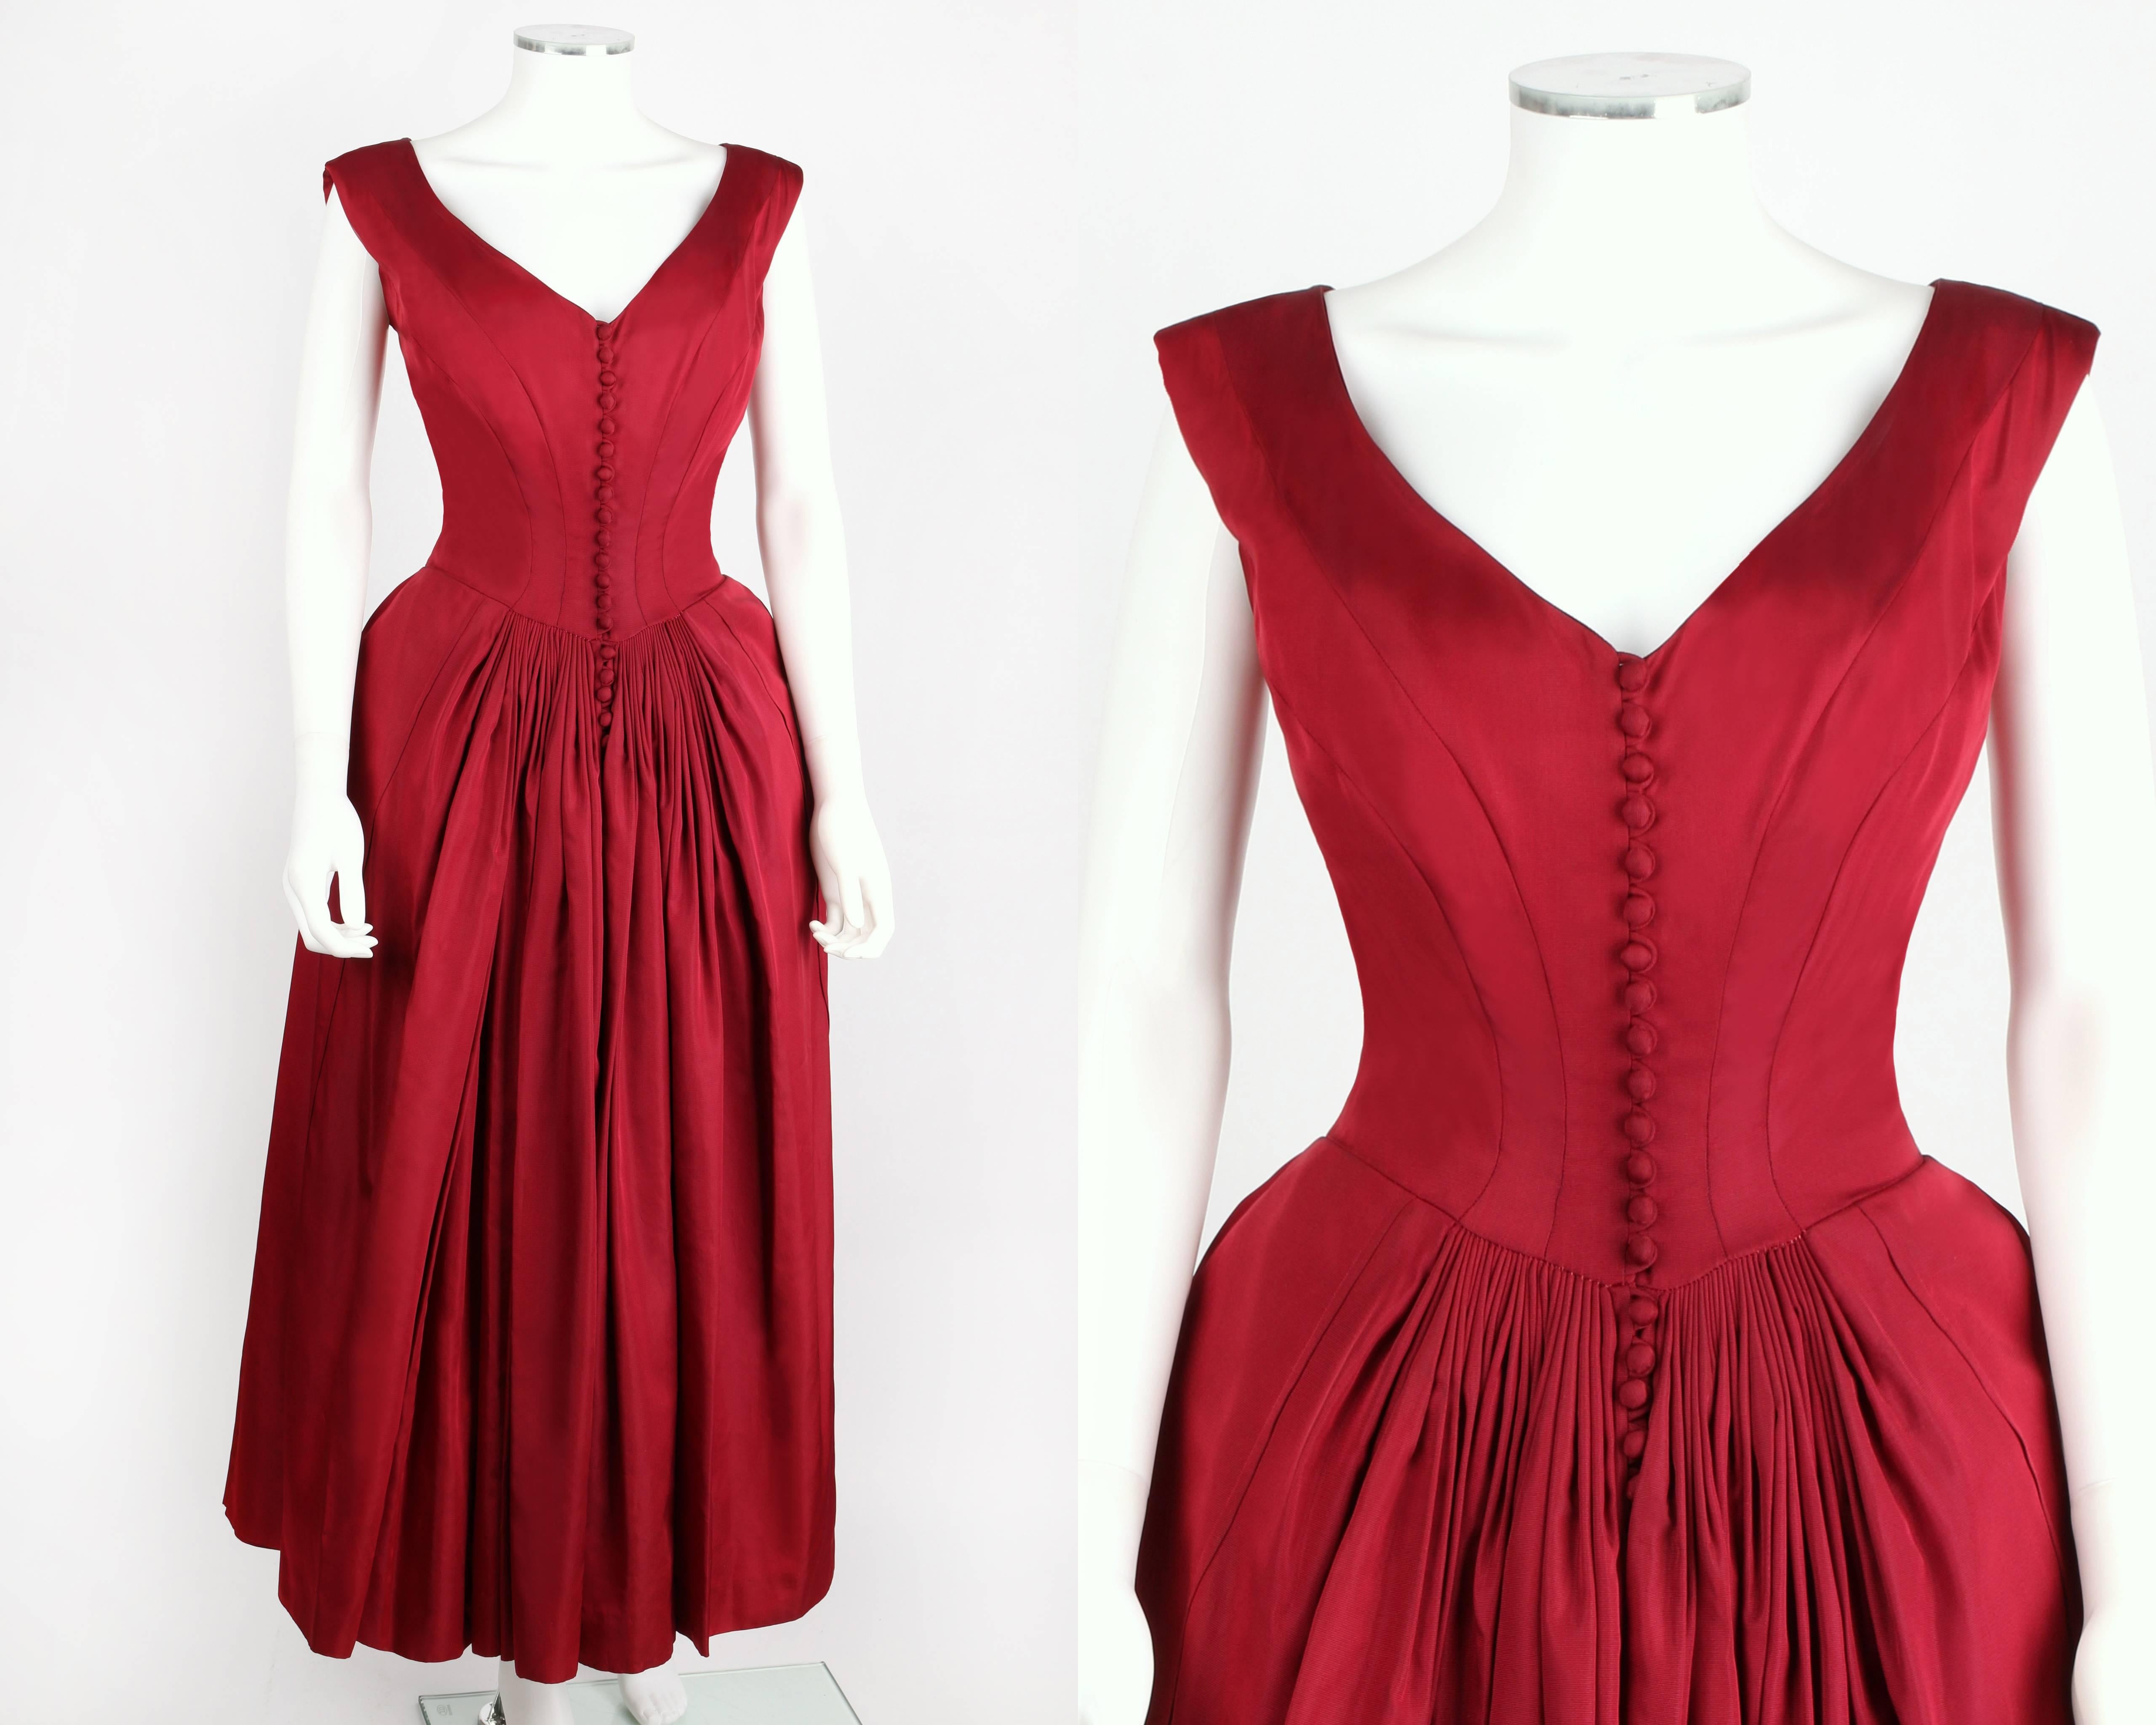 Rare and important Nettie Rosenstein circa 1949 red faille evening dress.  Likely an Eva Rosencrans design, this gown is New Old Stock with original tags and a packet of buttons still attached. Dress has a low v-neckline at front and sits slightly